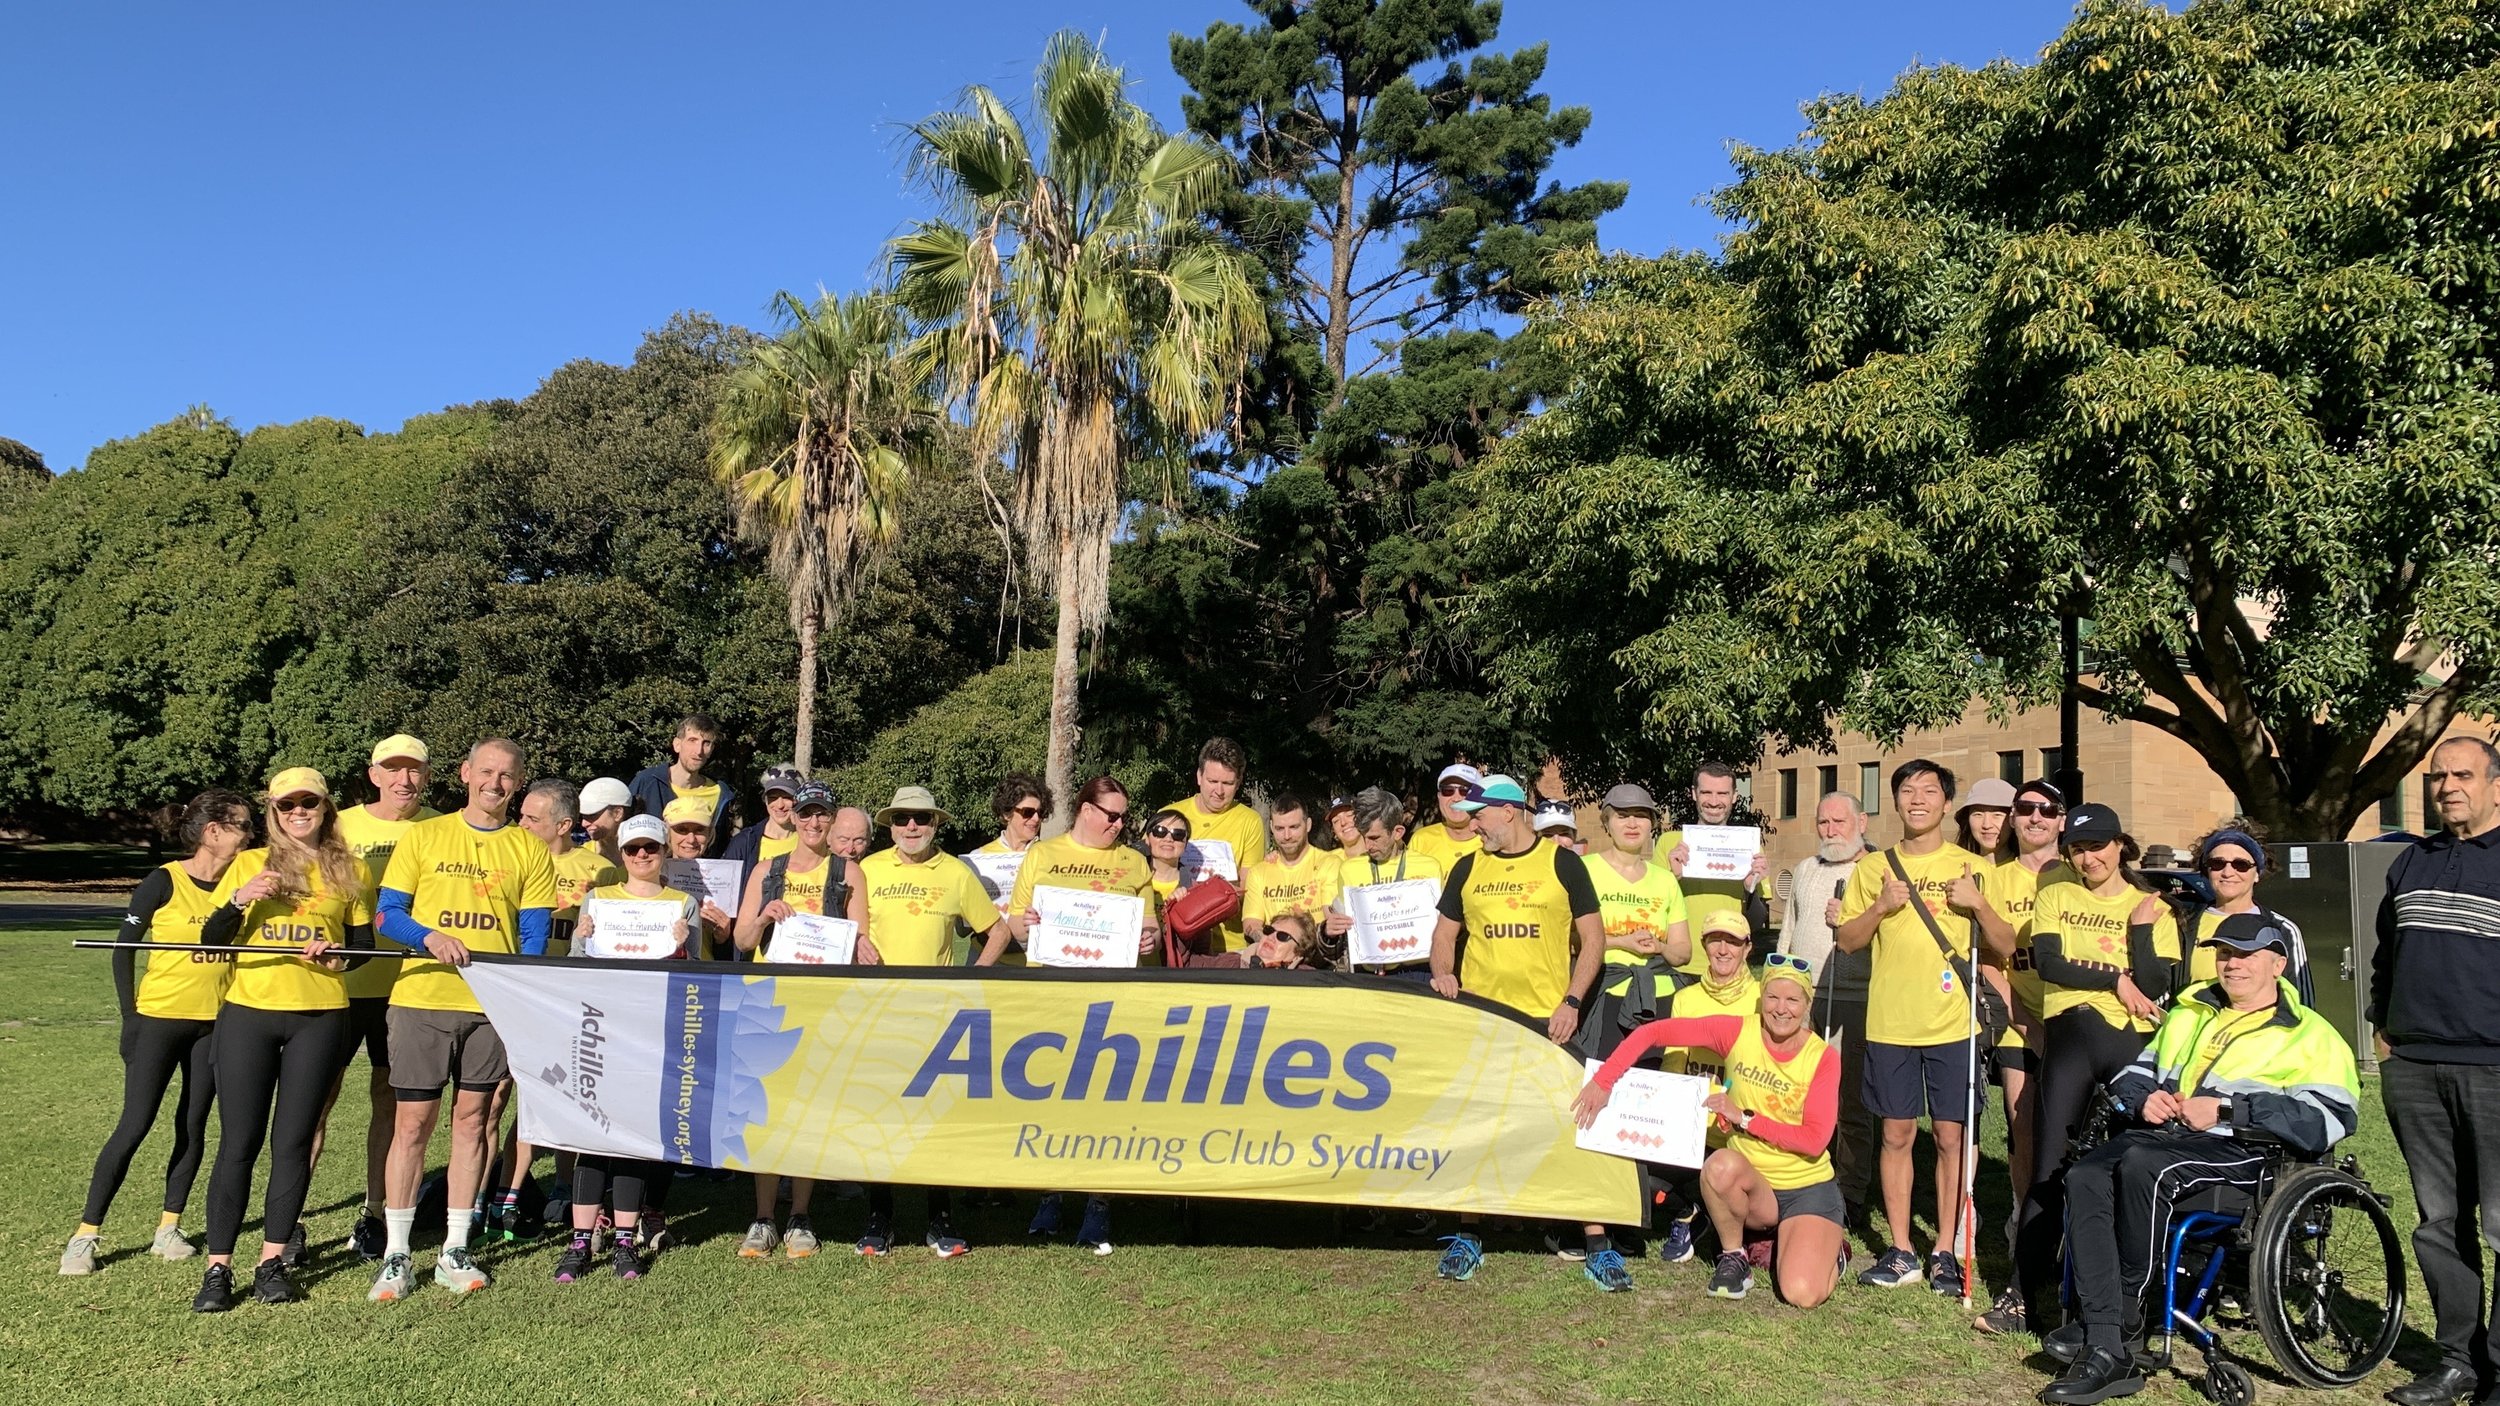  Group photo of Achilles Sydney members posing in front of a giant feather flag that says “Achilles” 